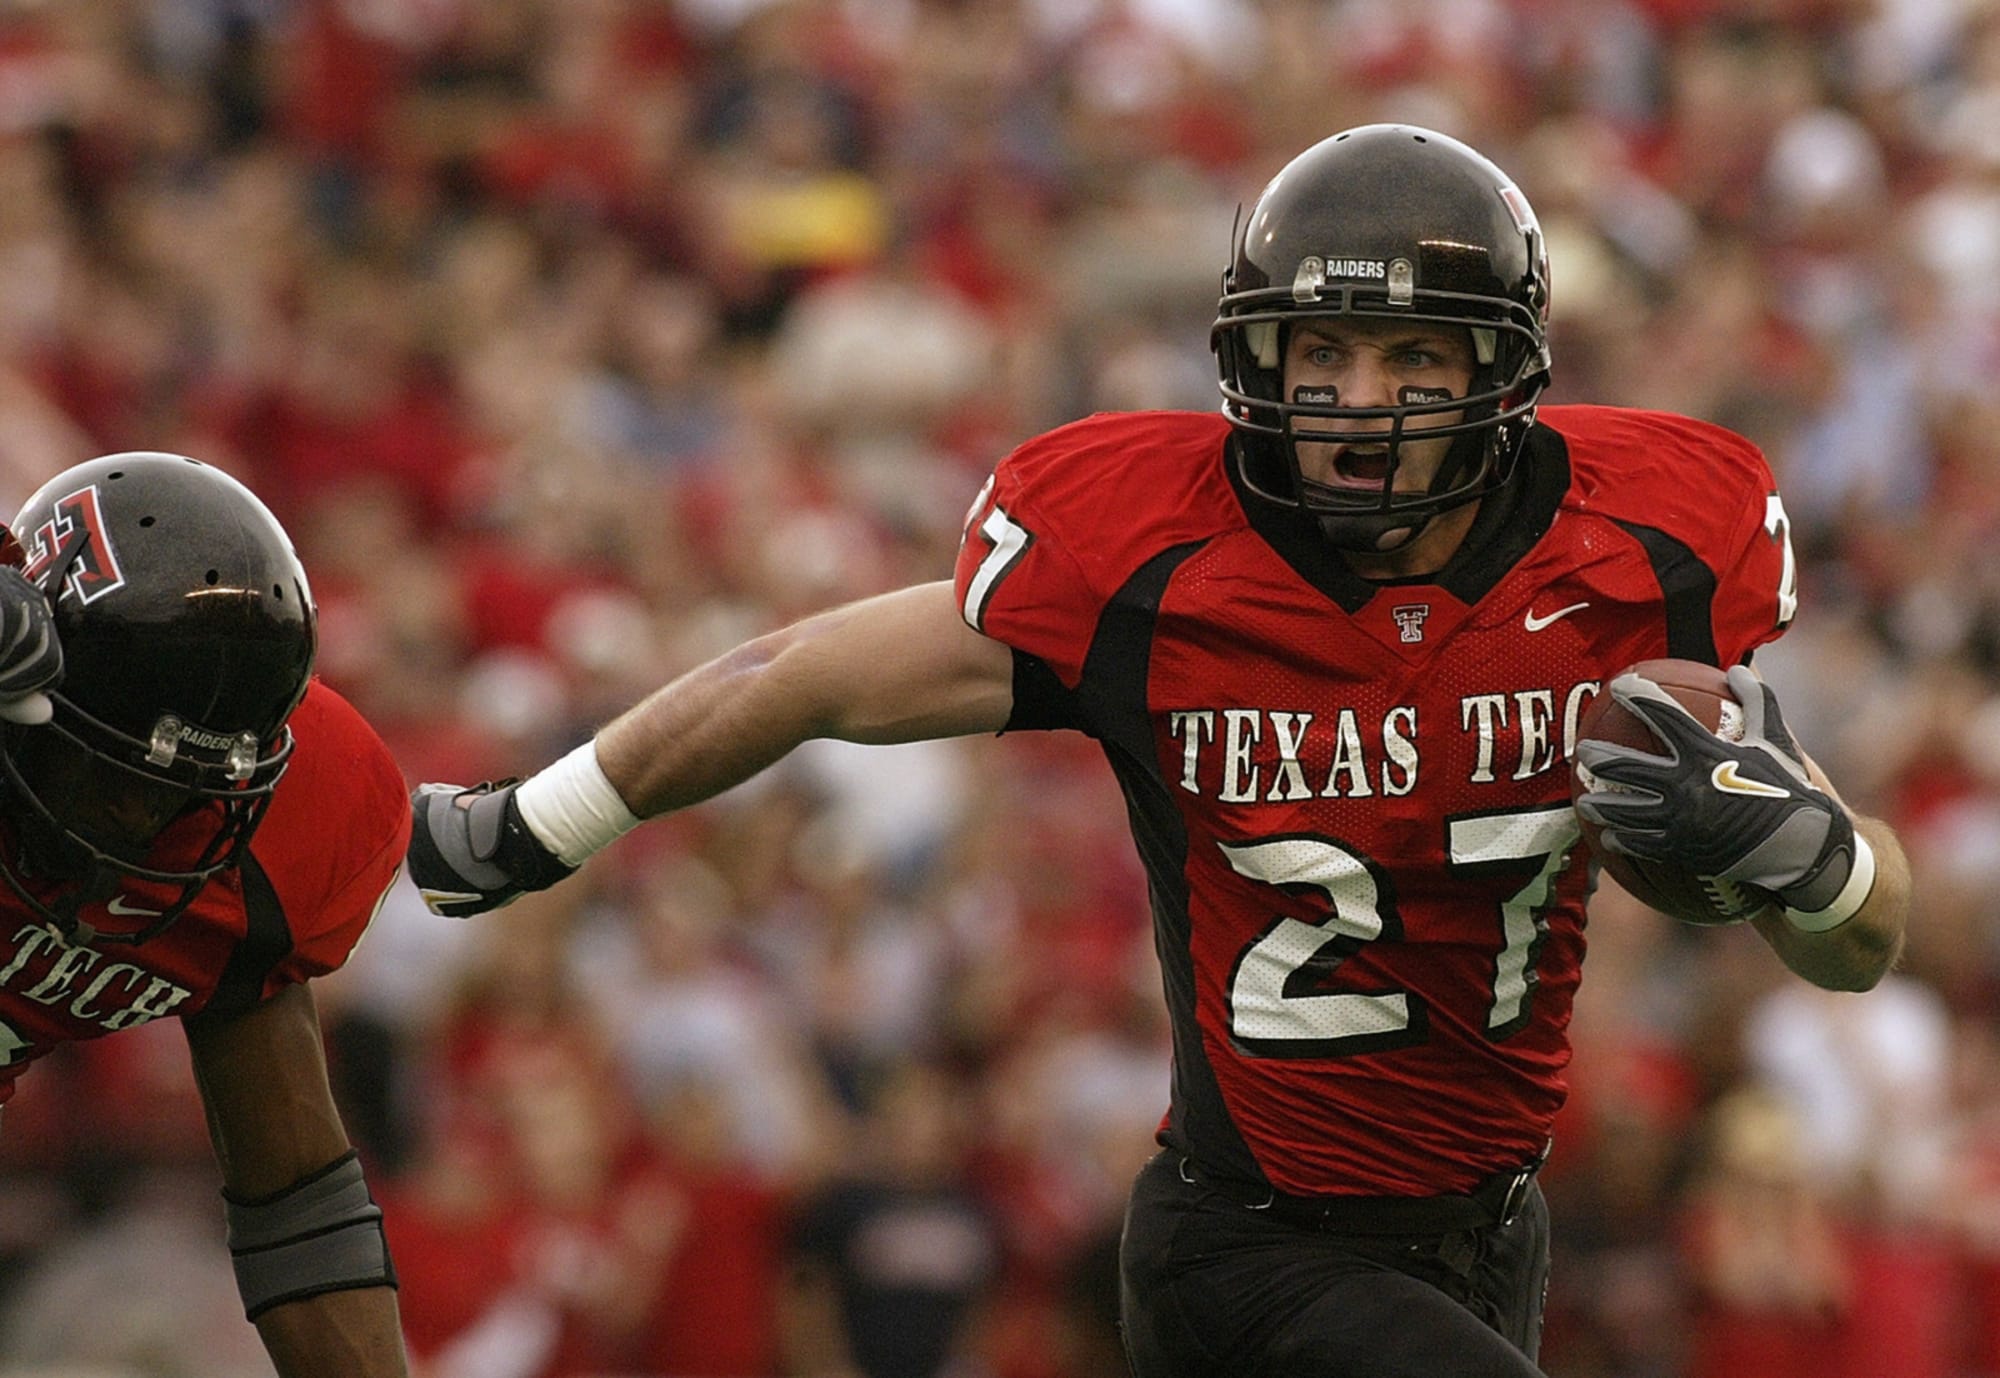 Texas Tech Red Raiders Team-Issued #27 Black State Flag Jersey from the  2014 NCAA Football Season